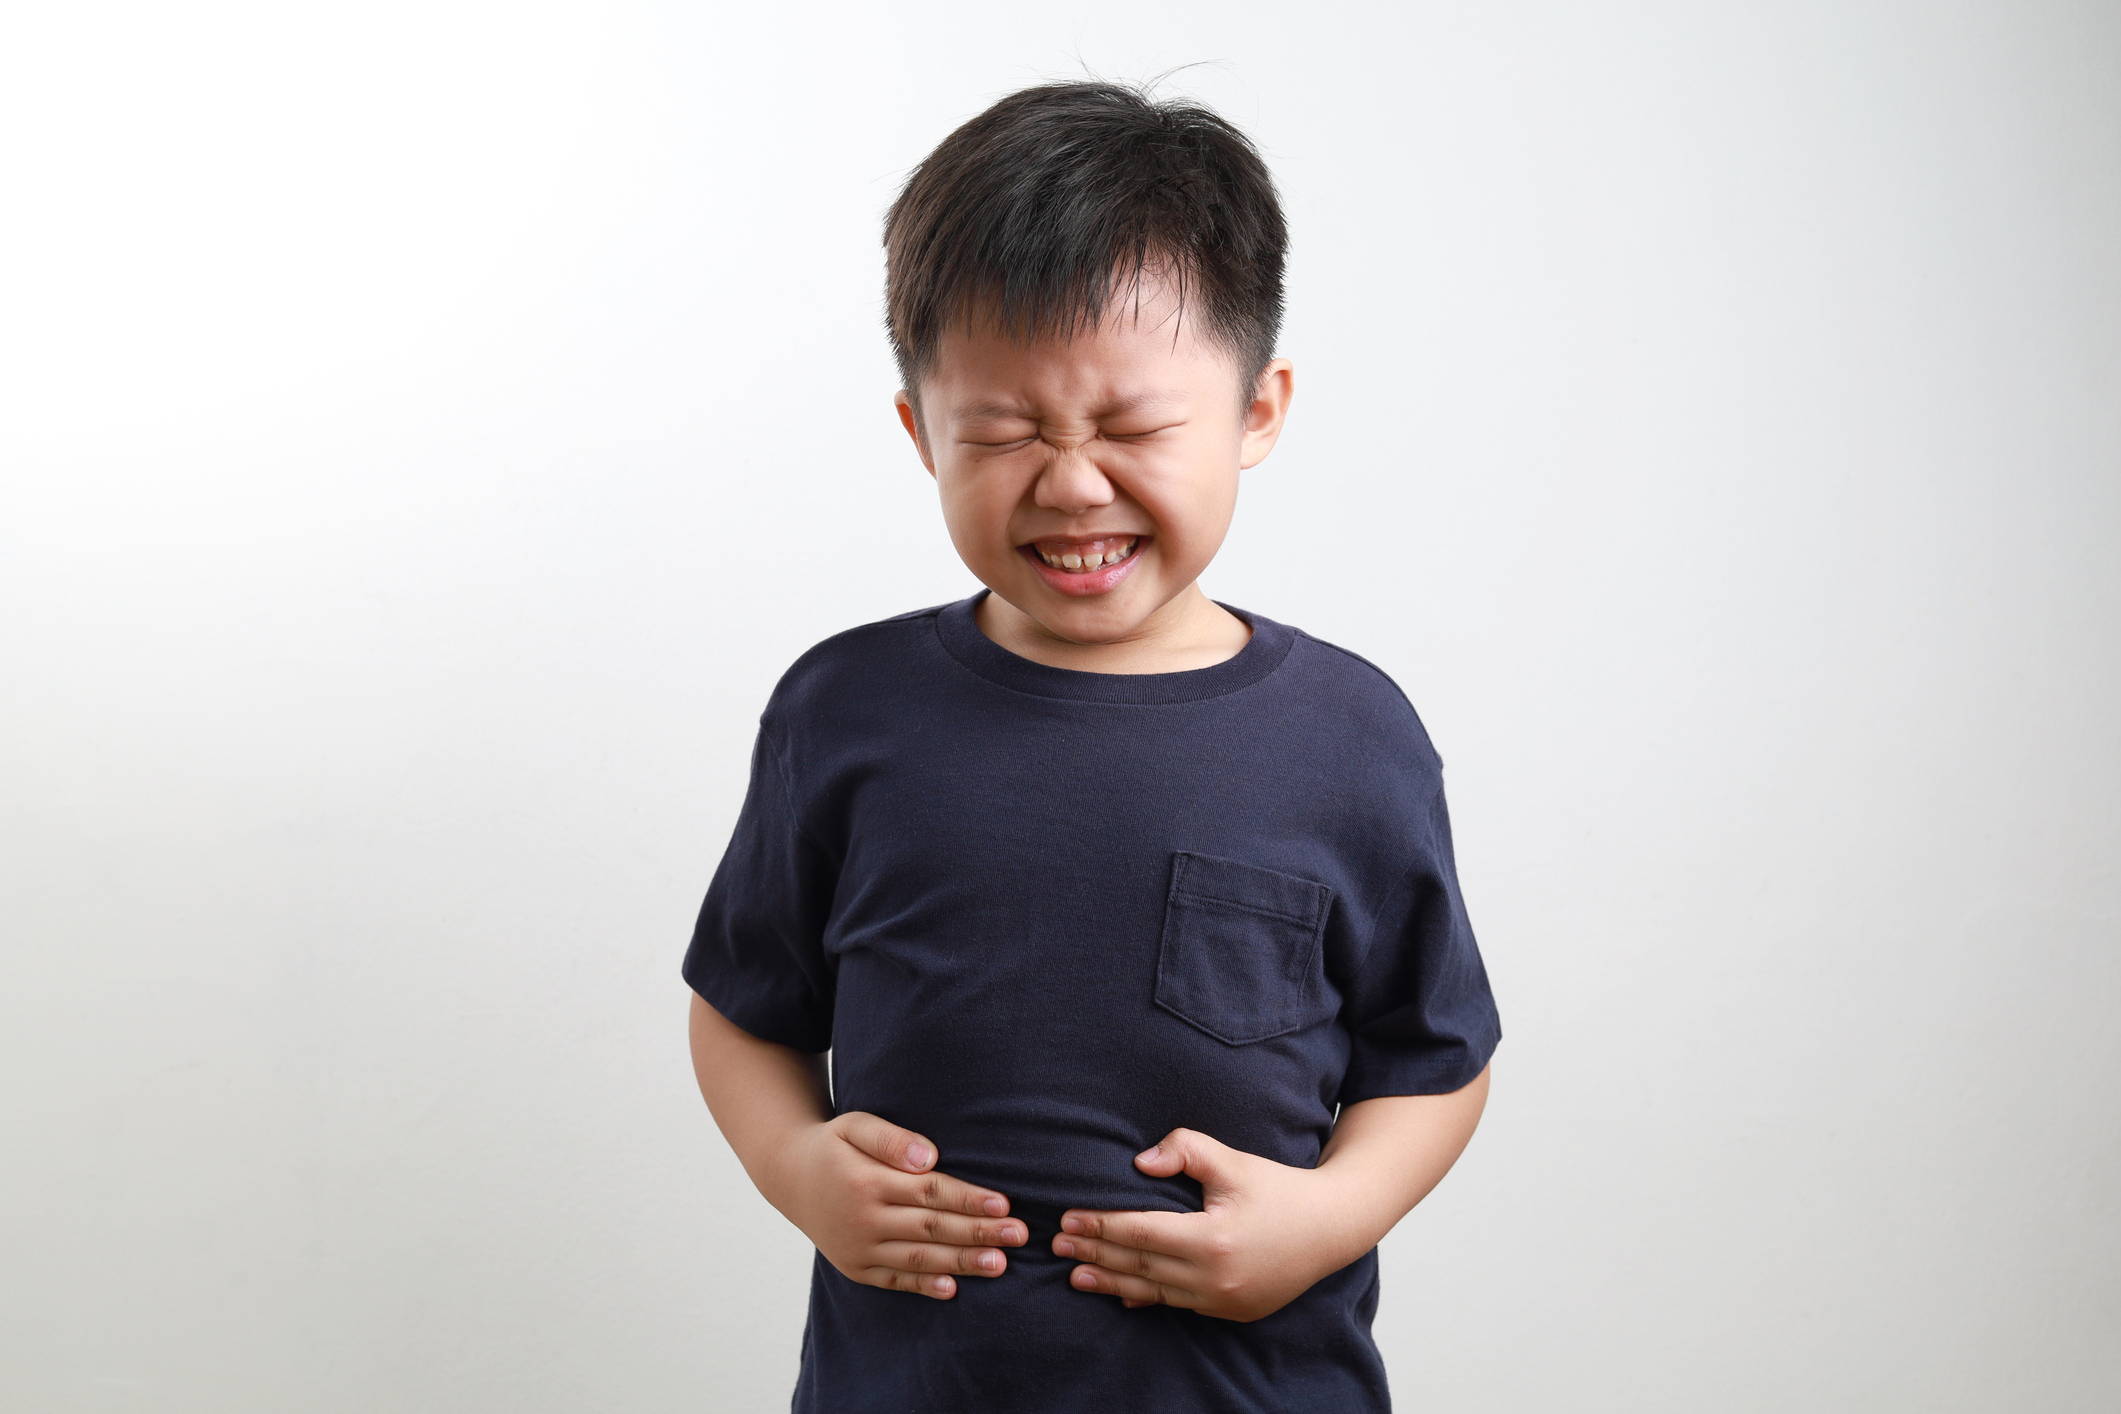 Boy holding stomach in pain